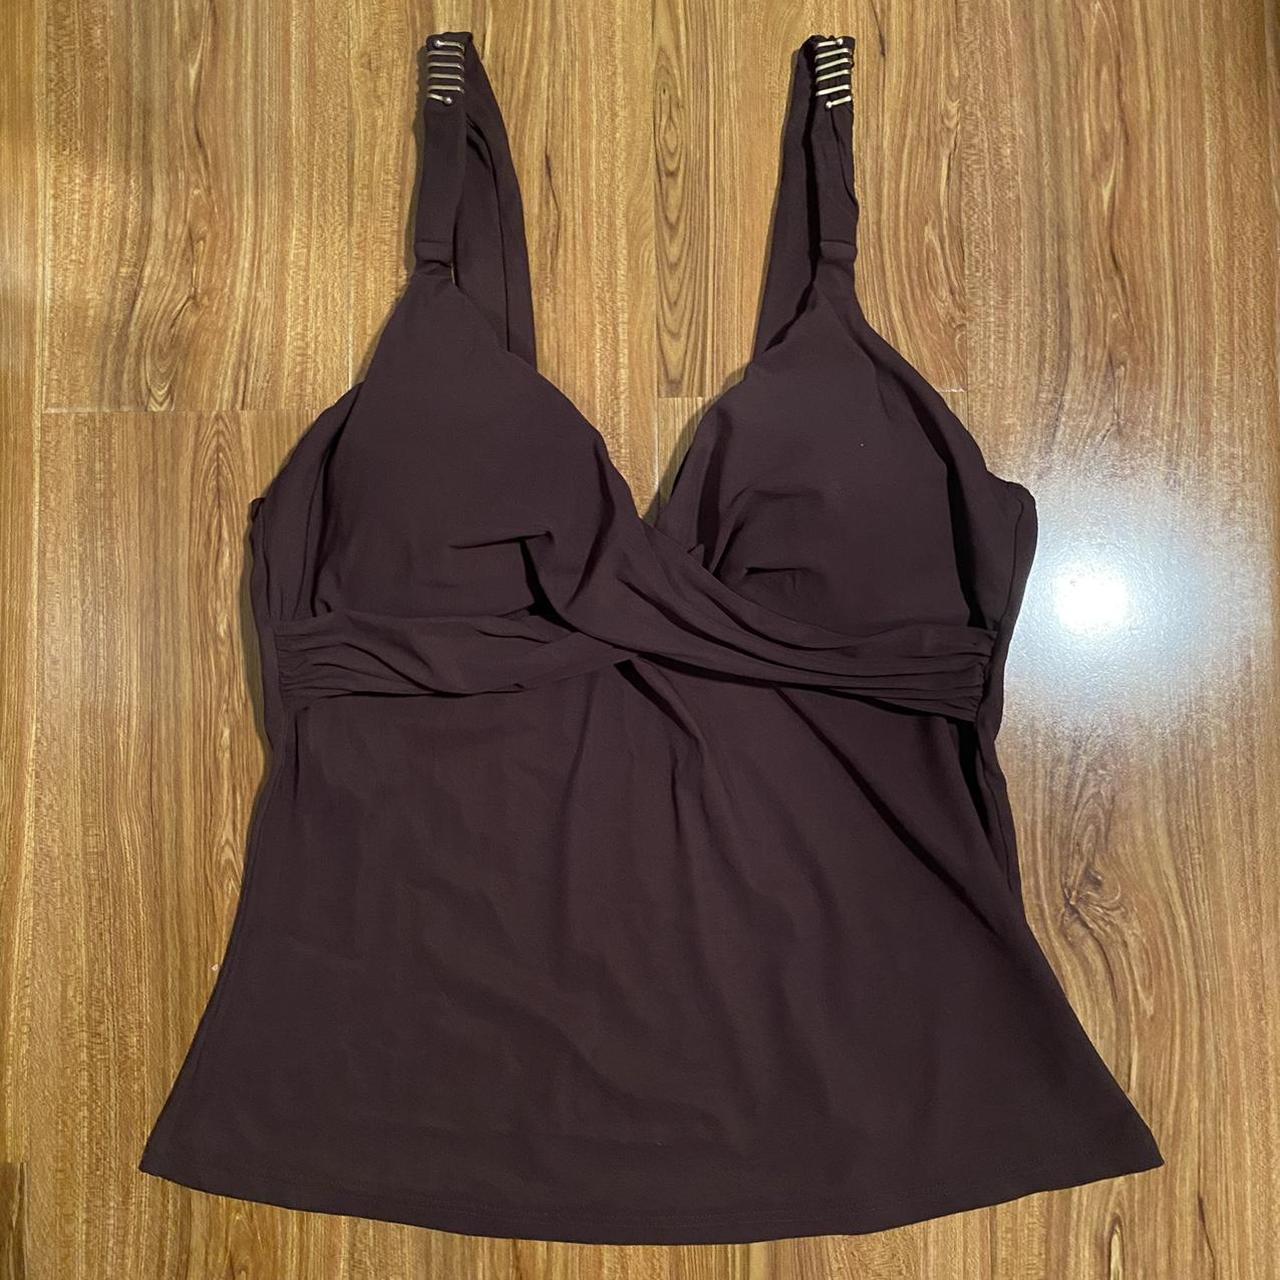 y2k brown tankini top!! such a cute top and has... - Depop